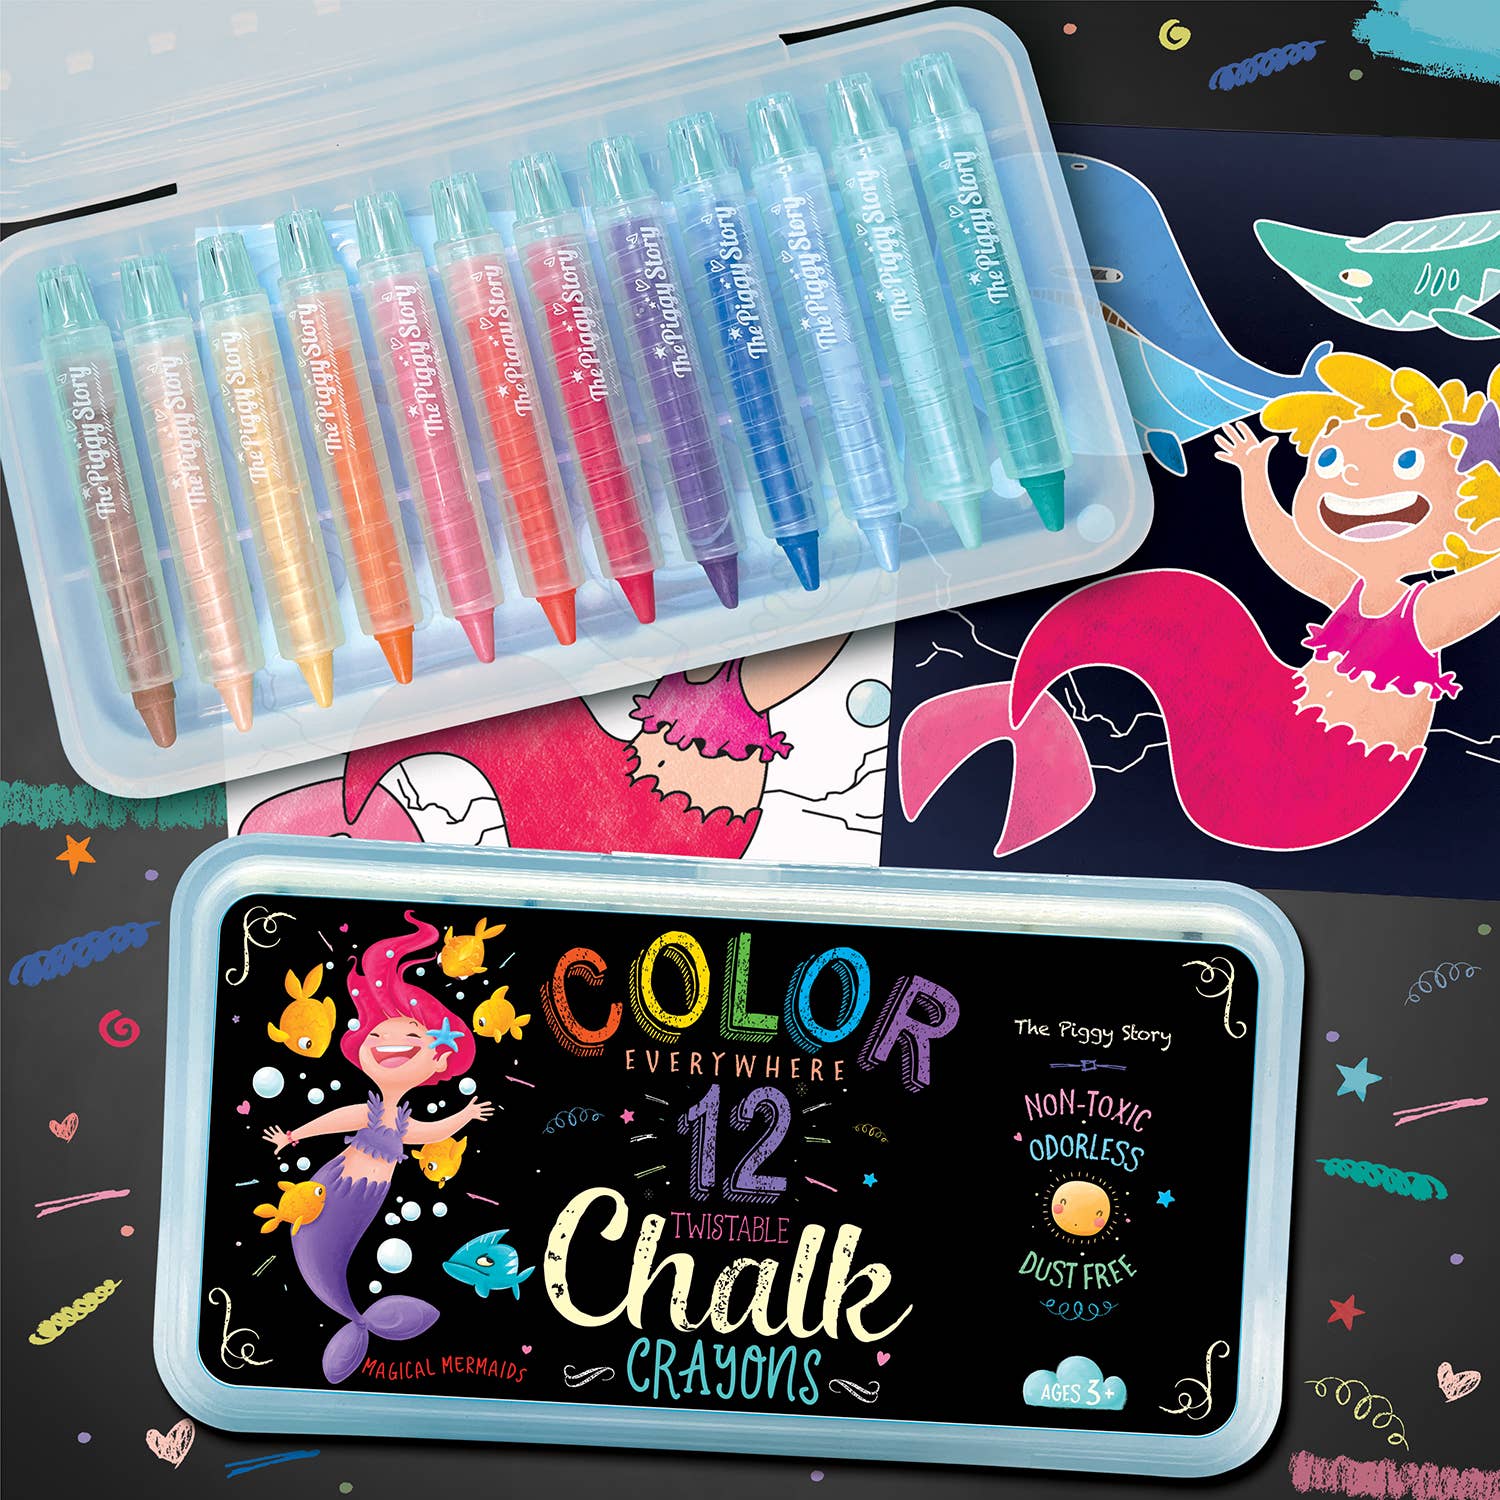 Color Everywhere Twistable Chalk Crayons | Magical Mermaids Toys The Piggy Story   